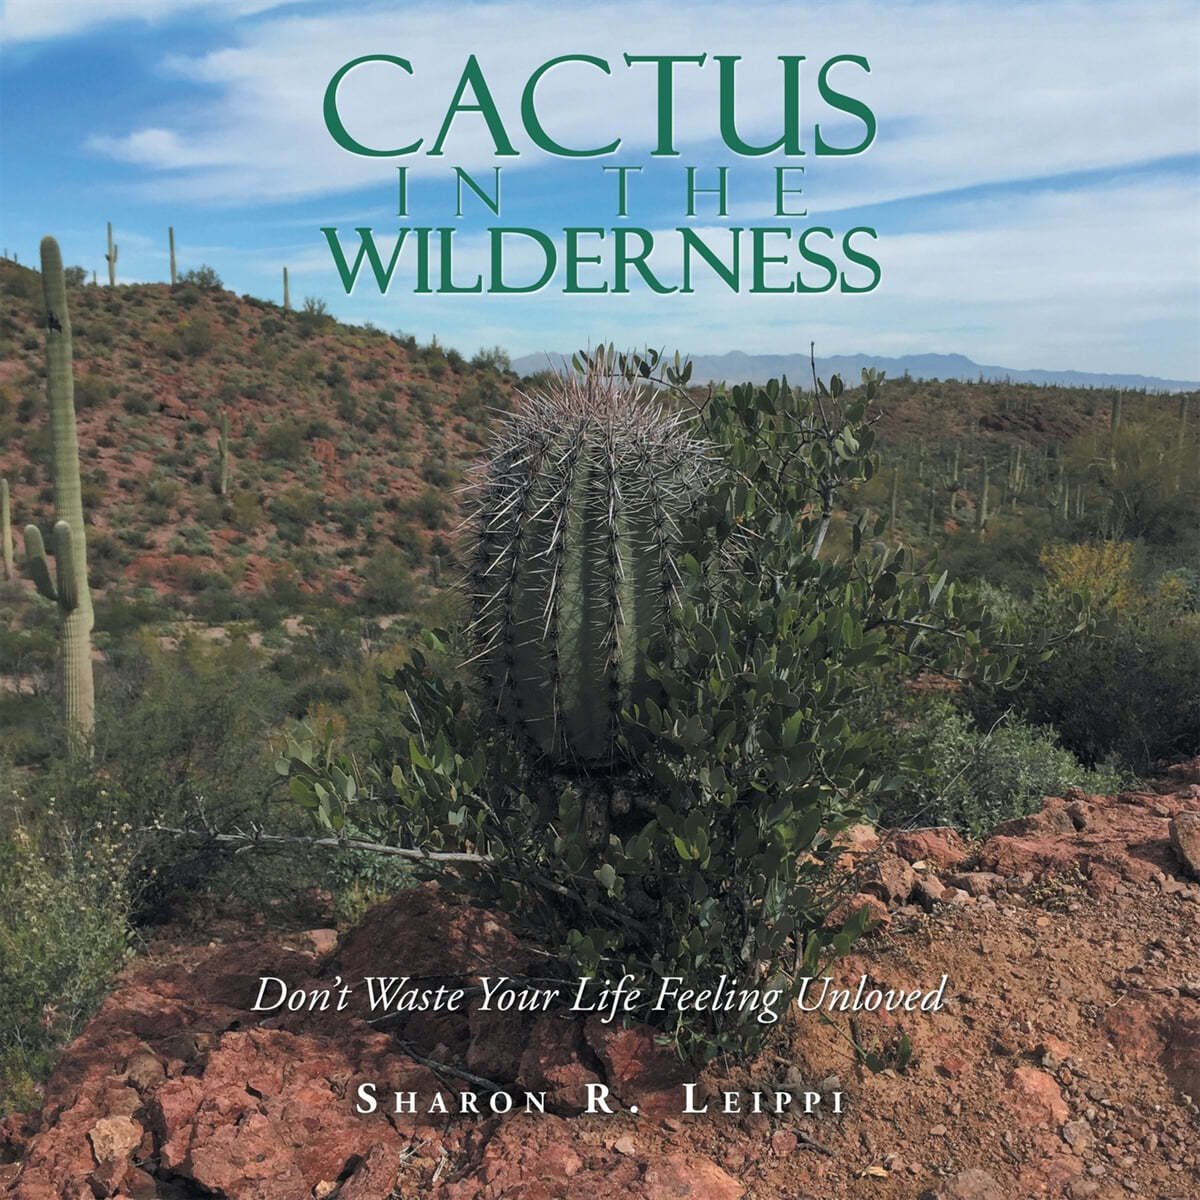 Cactus in the Wilderness